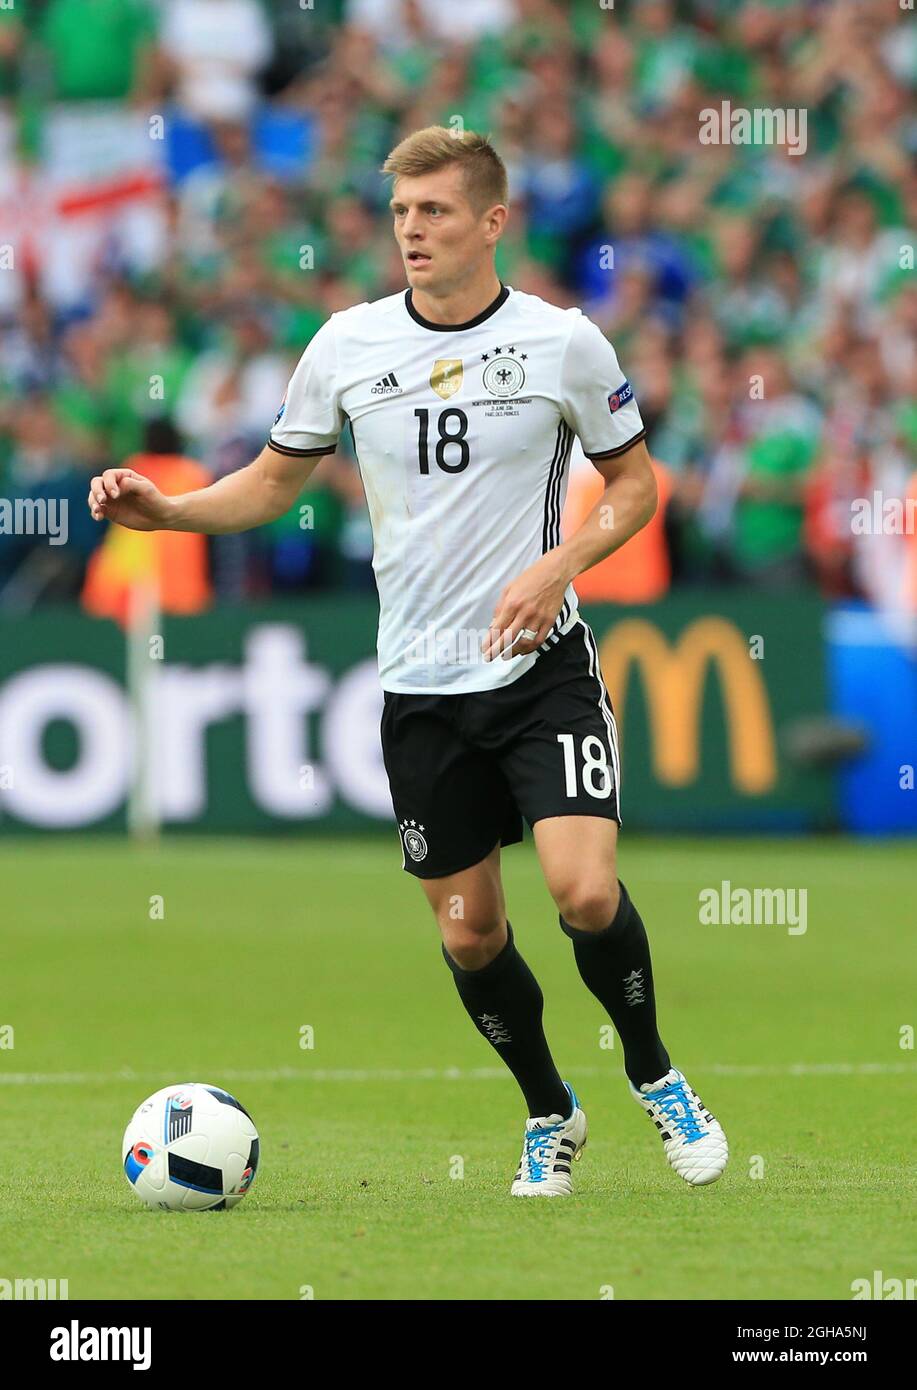 Germany's Toni Kroos in action during the UEFA European Championship 2016 match at the Parc Des Princes, Paris. Picture date June 20th, 2016 Pic David Klein/Sportimage via PA Images Stock Photo